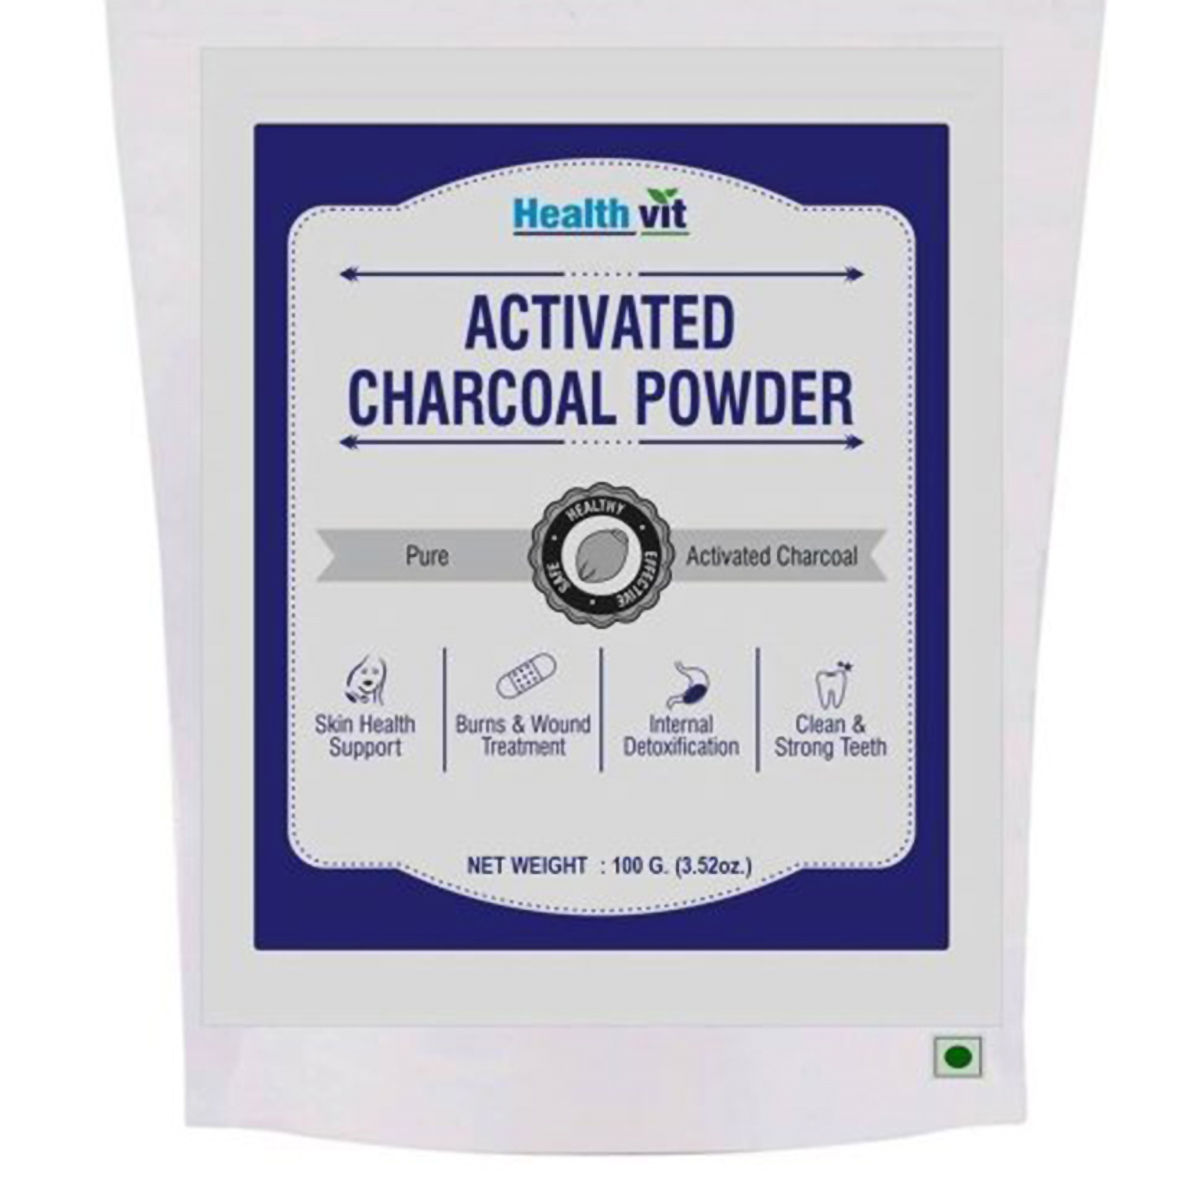 Buy Healthvit Activated Charcoal Powder, 100 gm Online